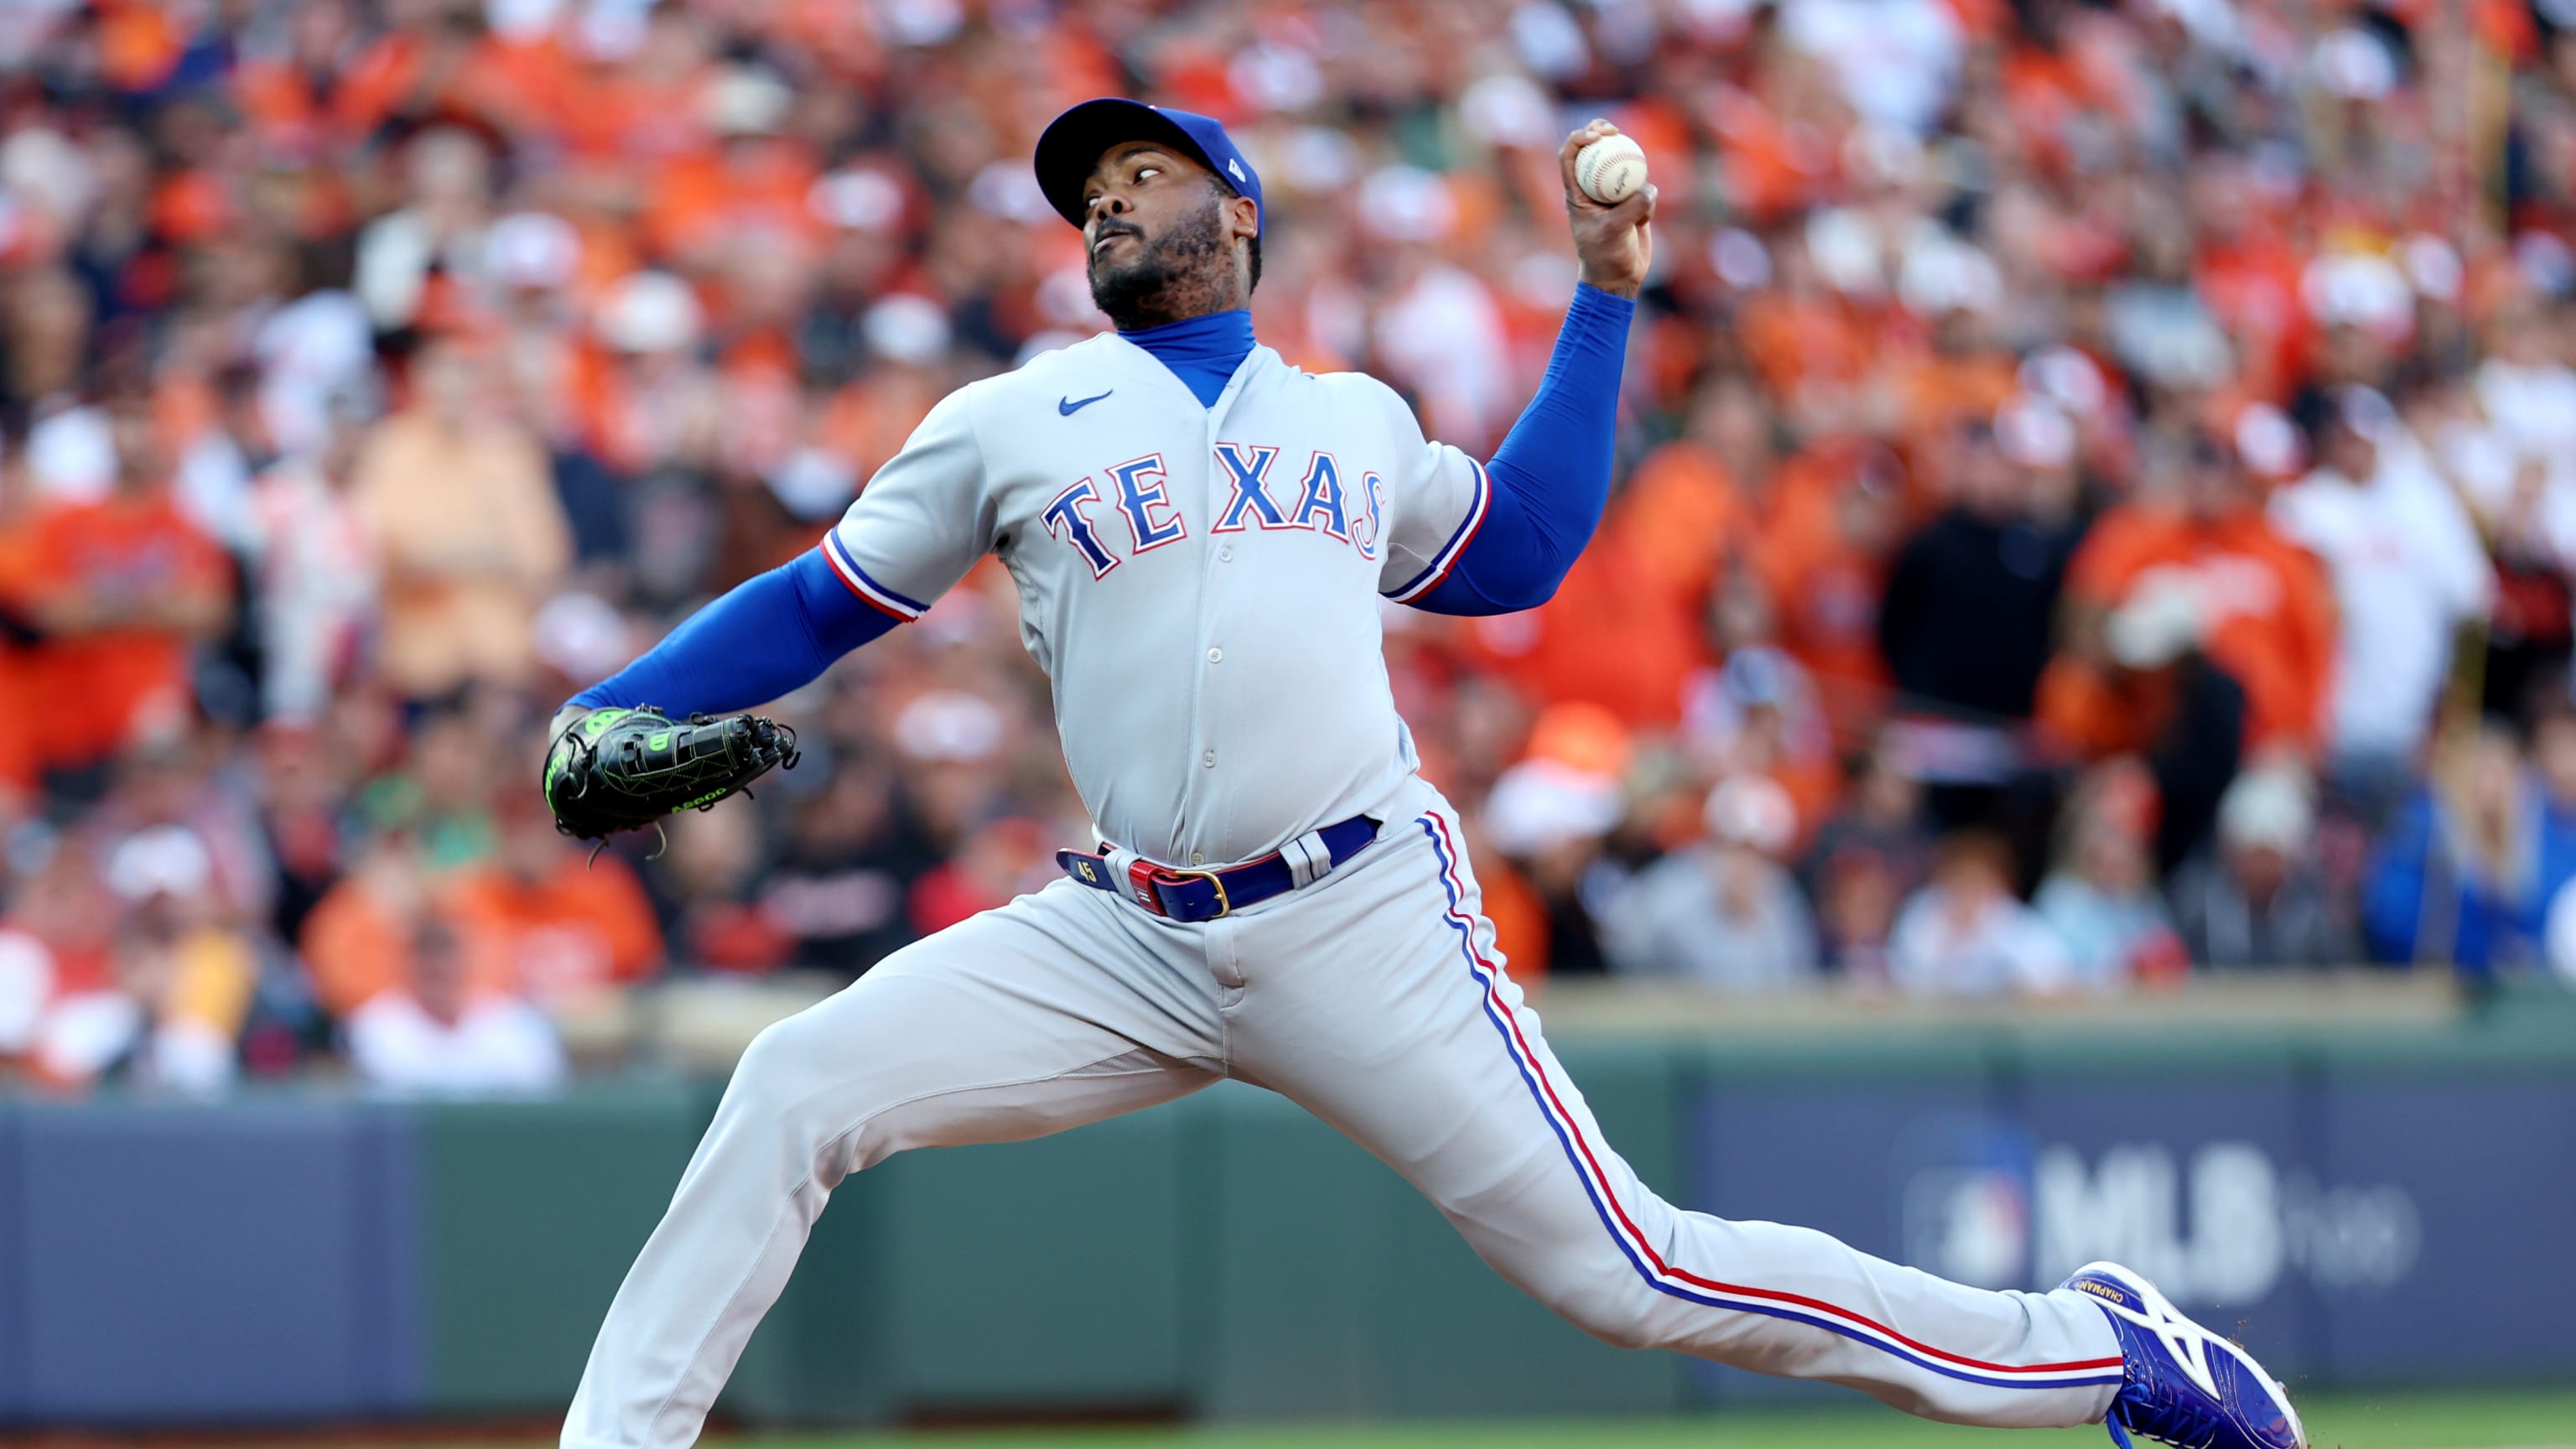 Loss of Chapman could affect NL Central